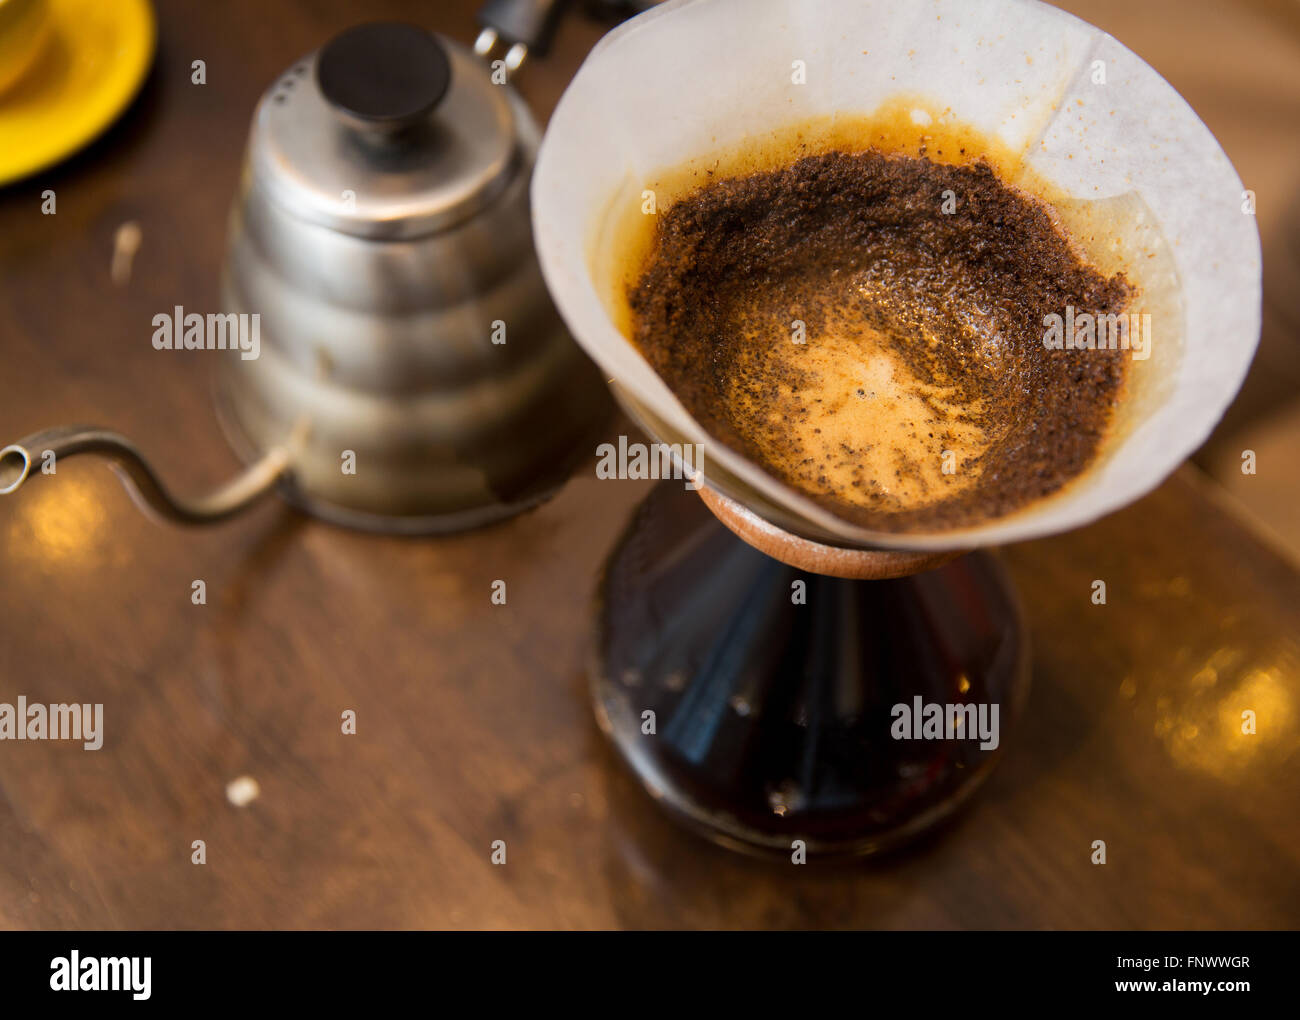 close up of coffeemaker and coffee pot Stock Photo